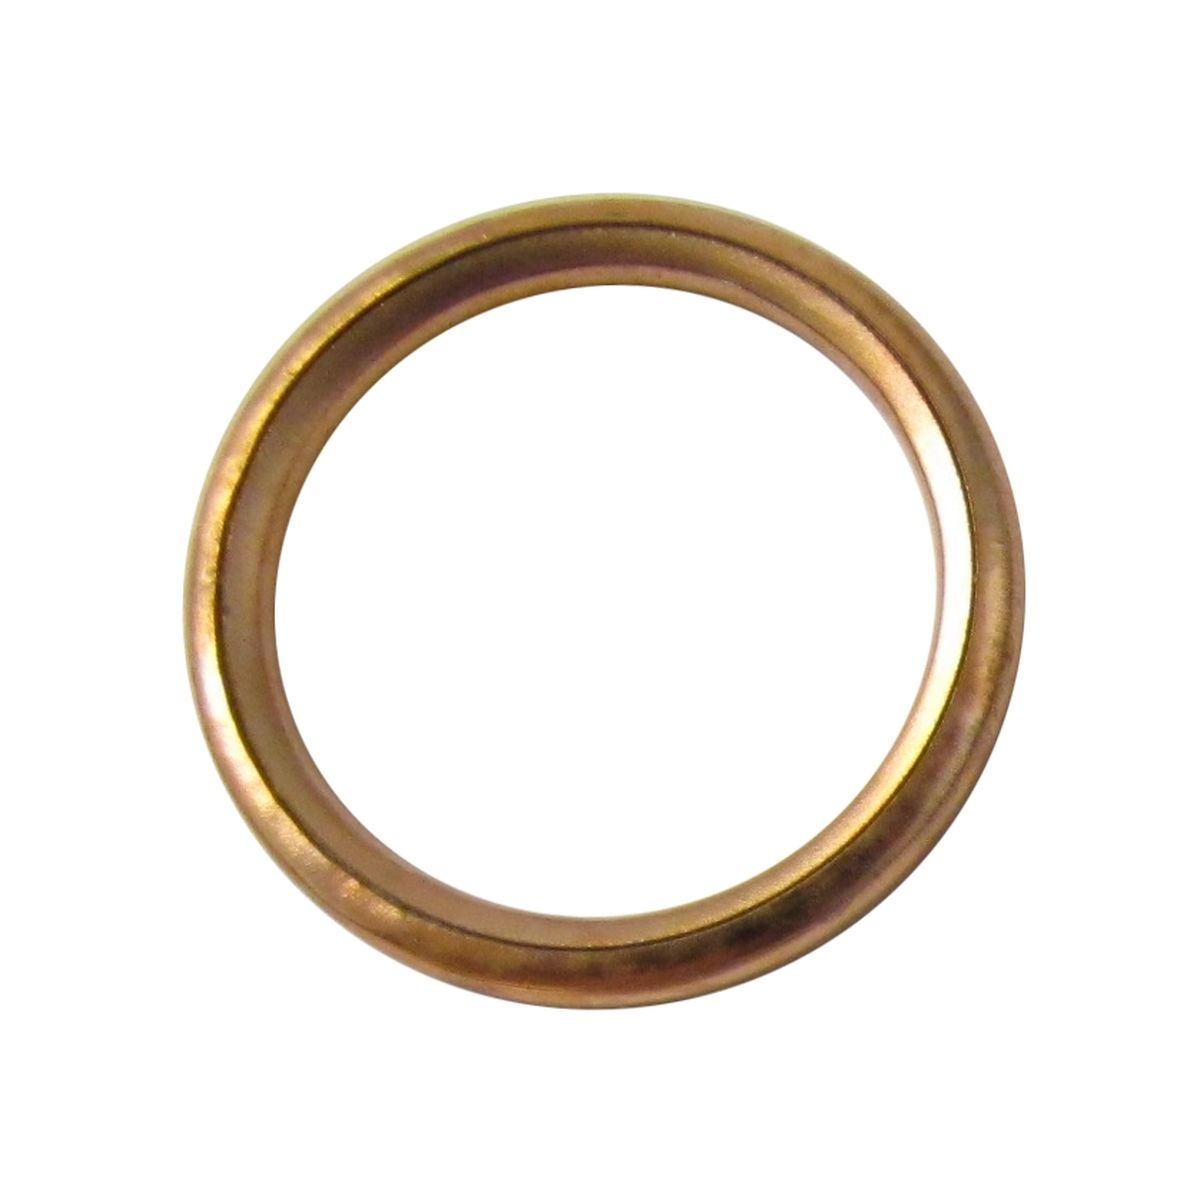 Exhaust Gasket Copper 1 for Wallaro Honda 1993 PK Cheap mail order specialty Miami Mall store 50